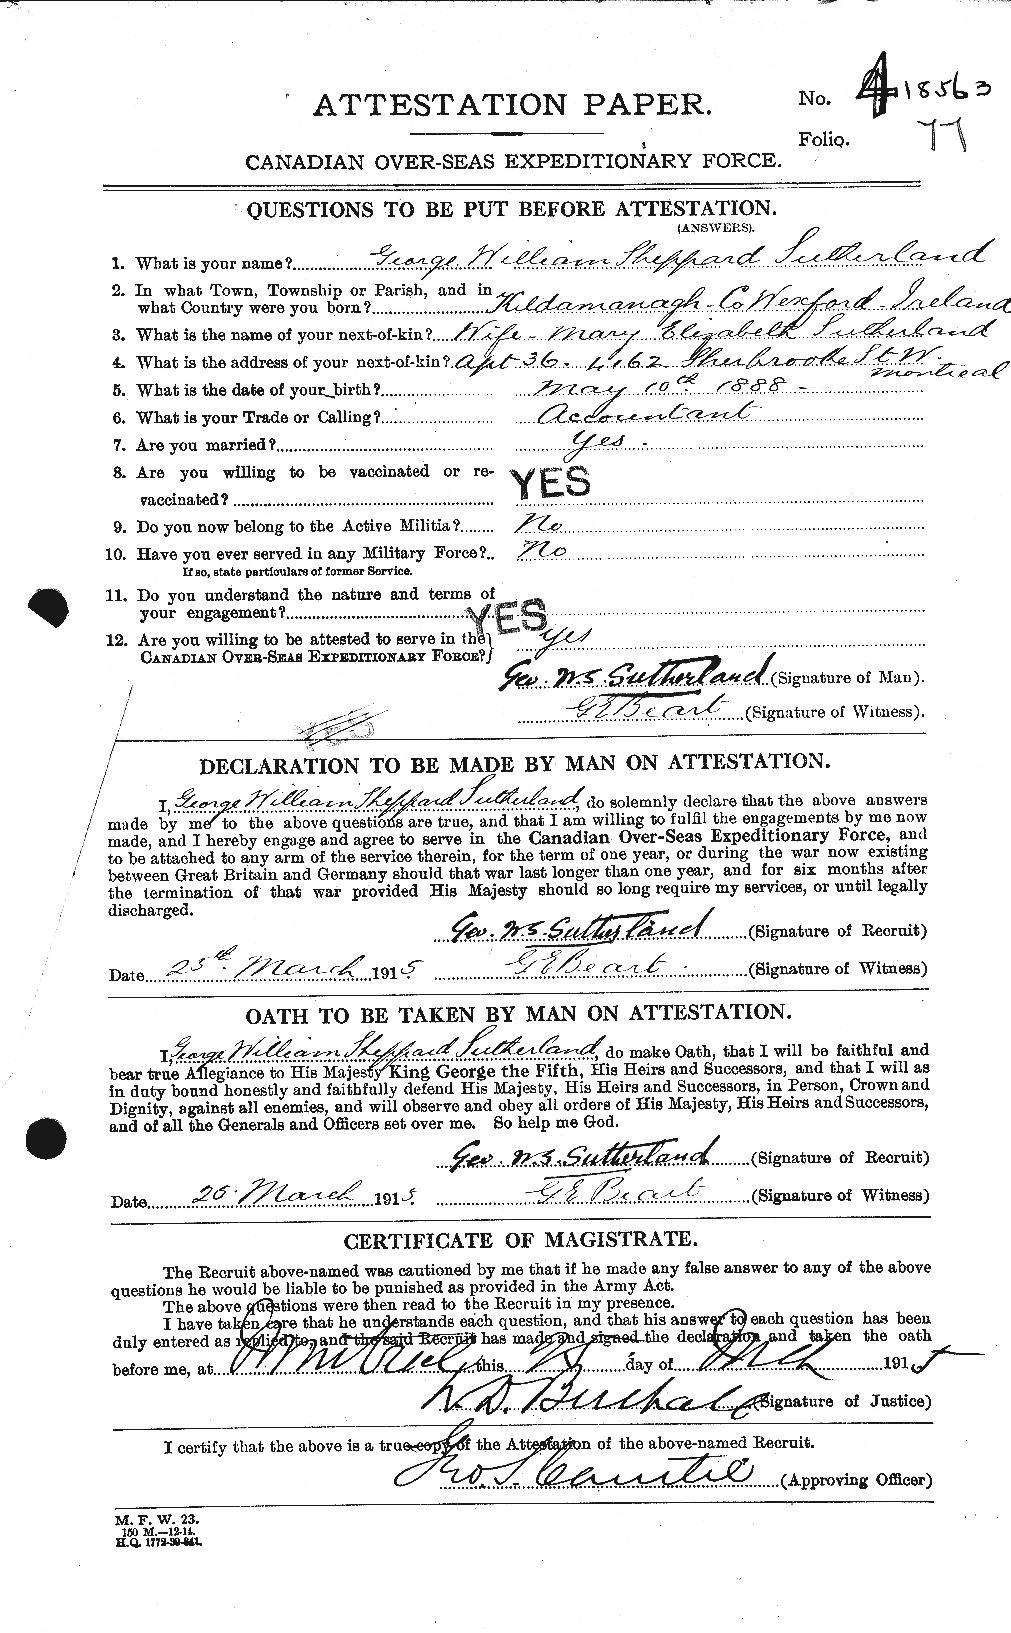 Personnel Records of the First World War - CEF 124838a